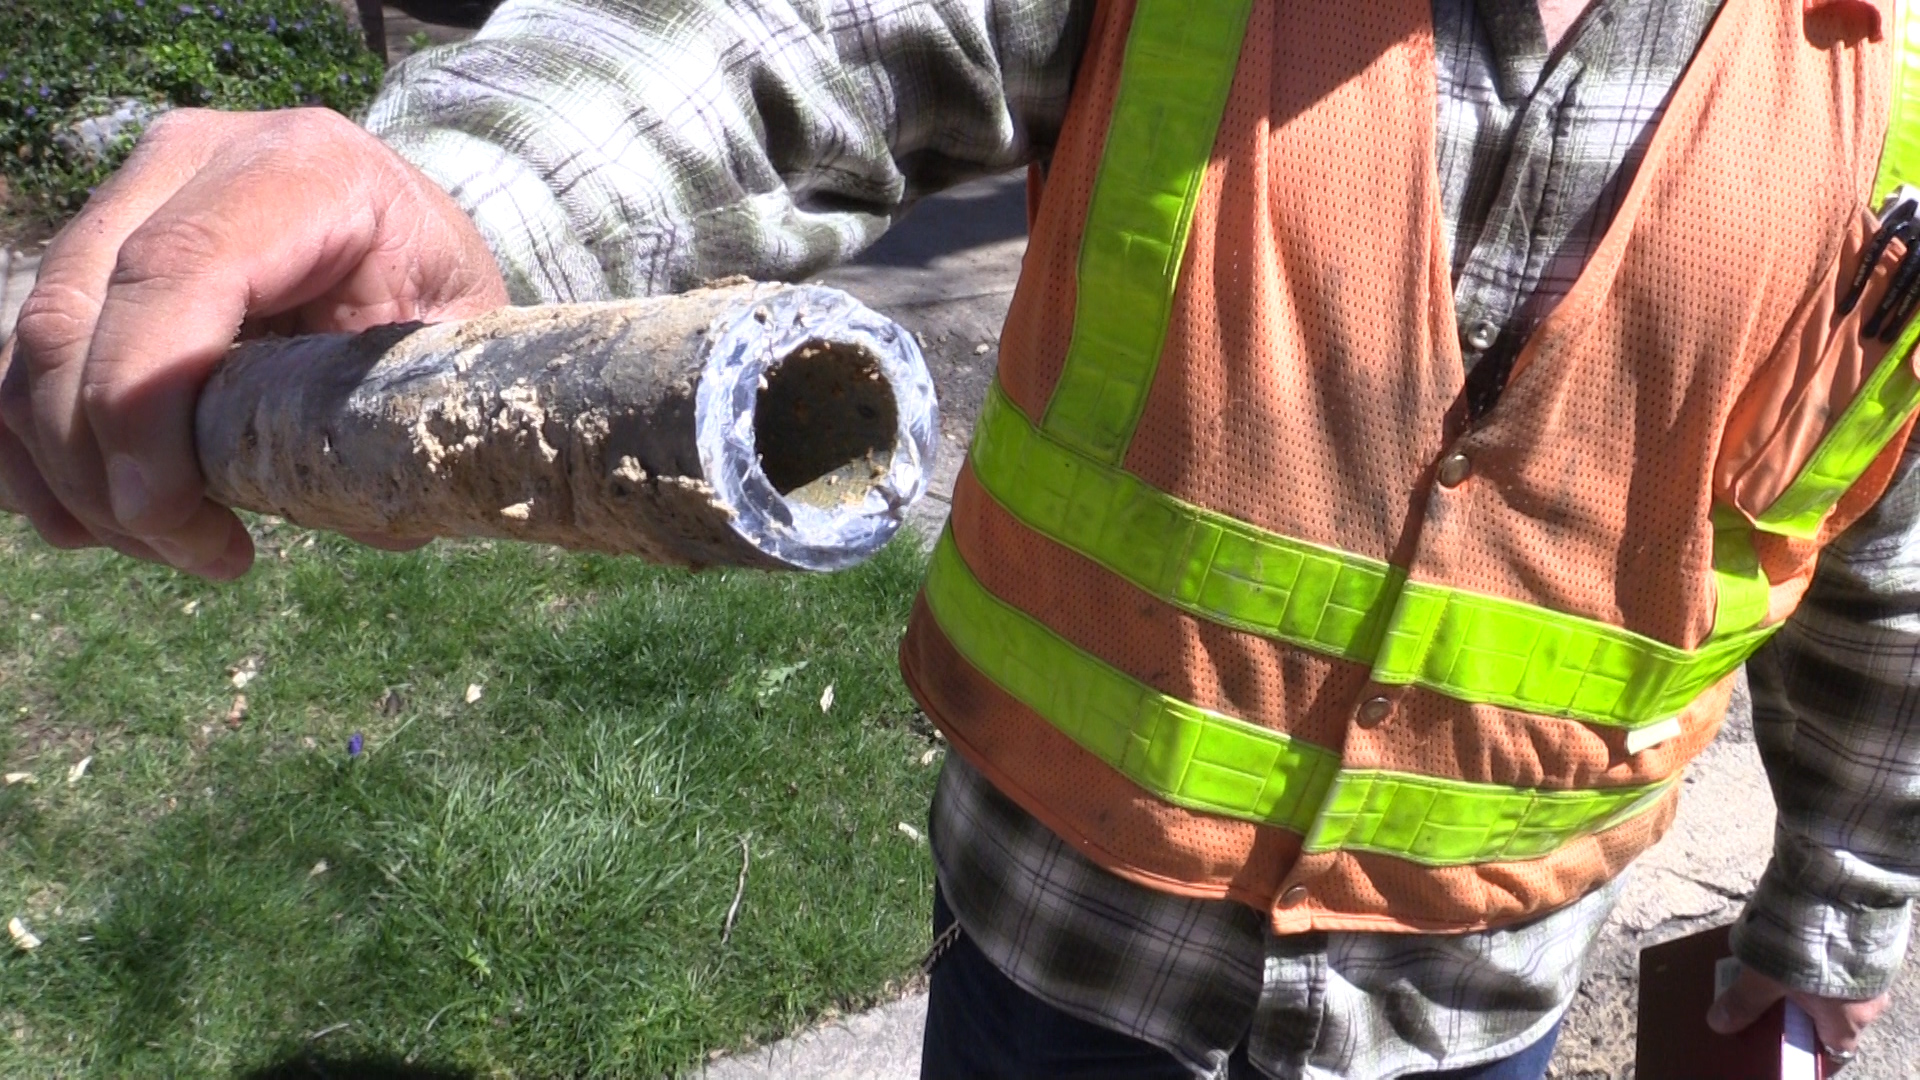 An old lead service pipe dug out of the ground.